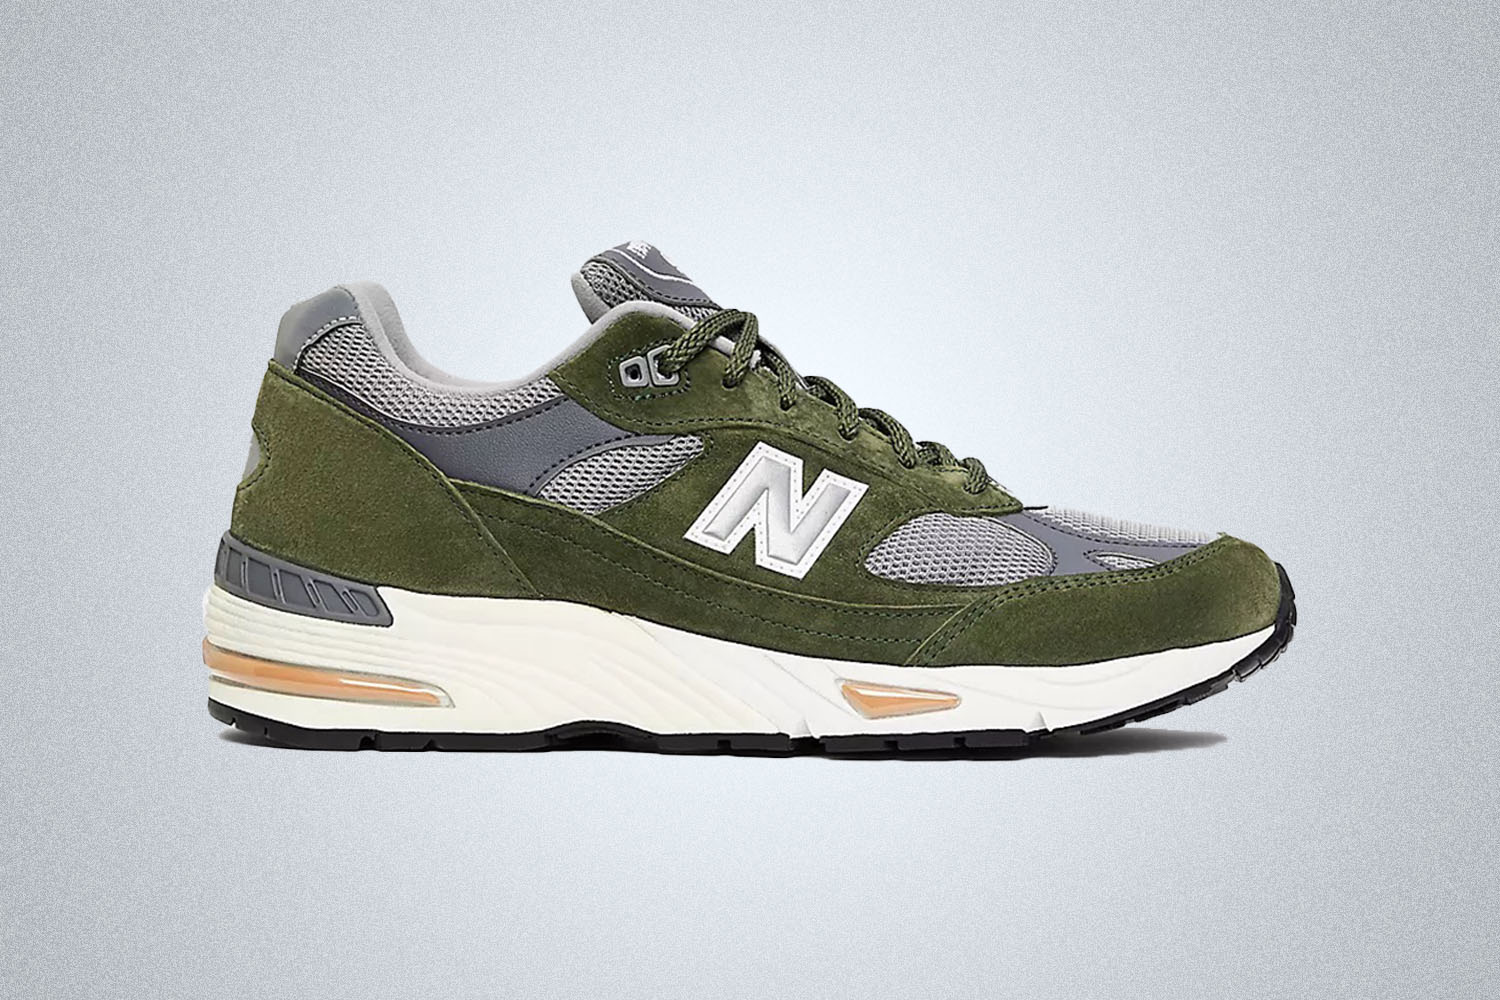 a pair of green New Balance 991 made in the Uk on a grey background